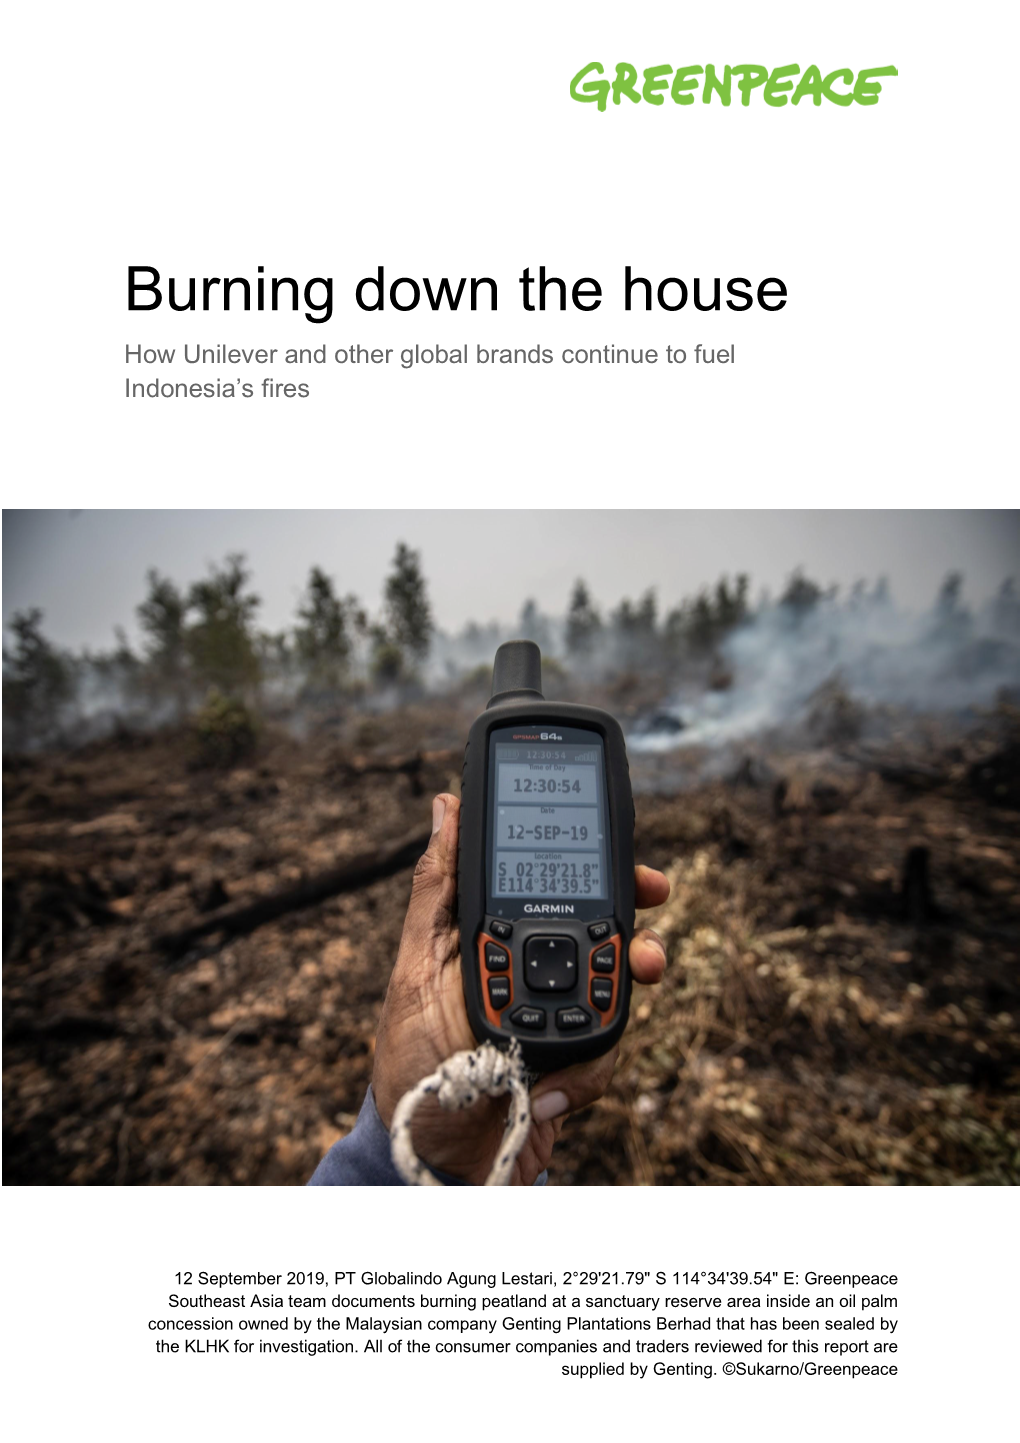 Burning Down the House How Unilever and Other Global Brands Continue to Fuel Indonesia’S Fires